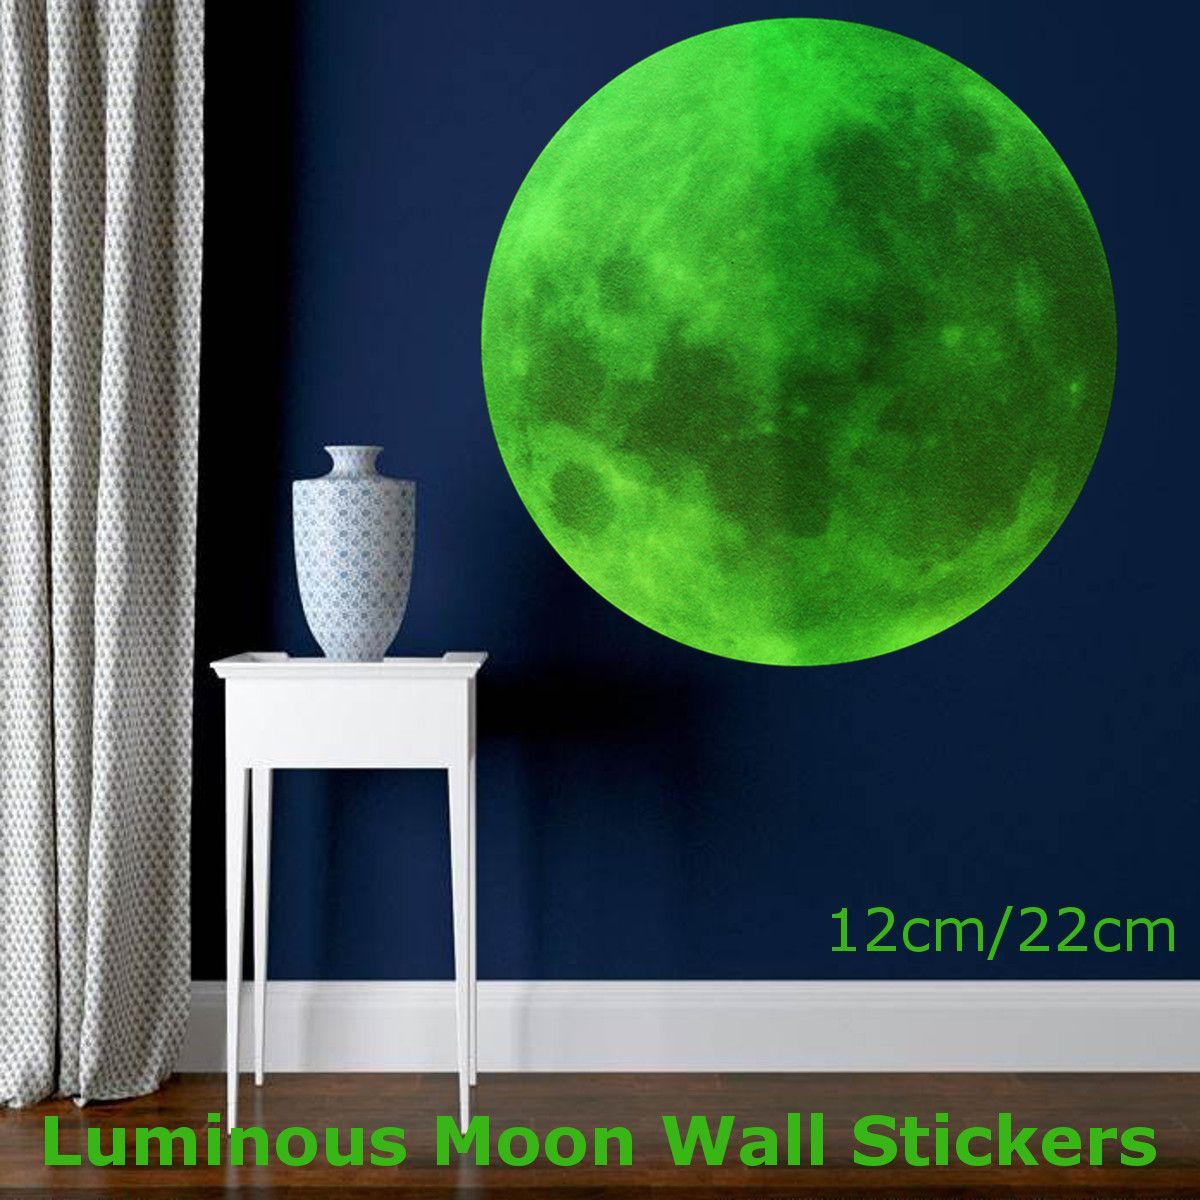 1222CM-Moon-Wall-Decal-Sticker-Moonlight-In-The-Dark-Ceiling-Home-Room-Decorations-1537346